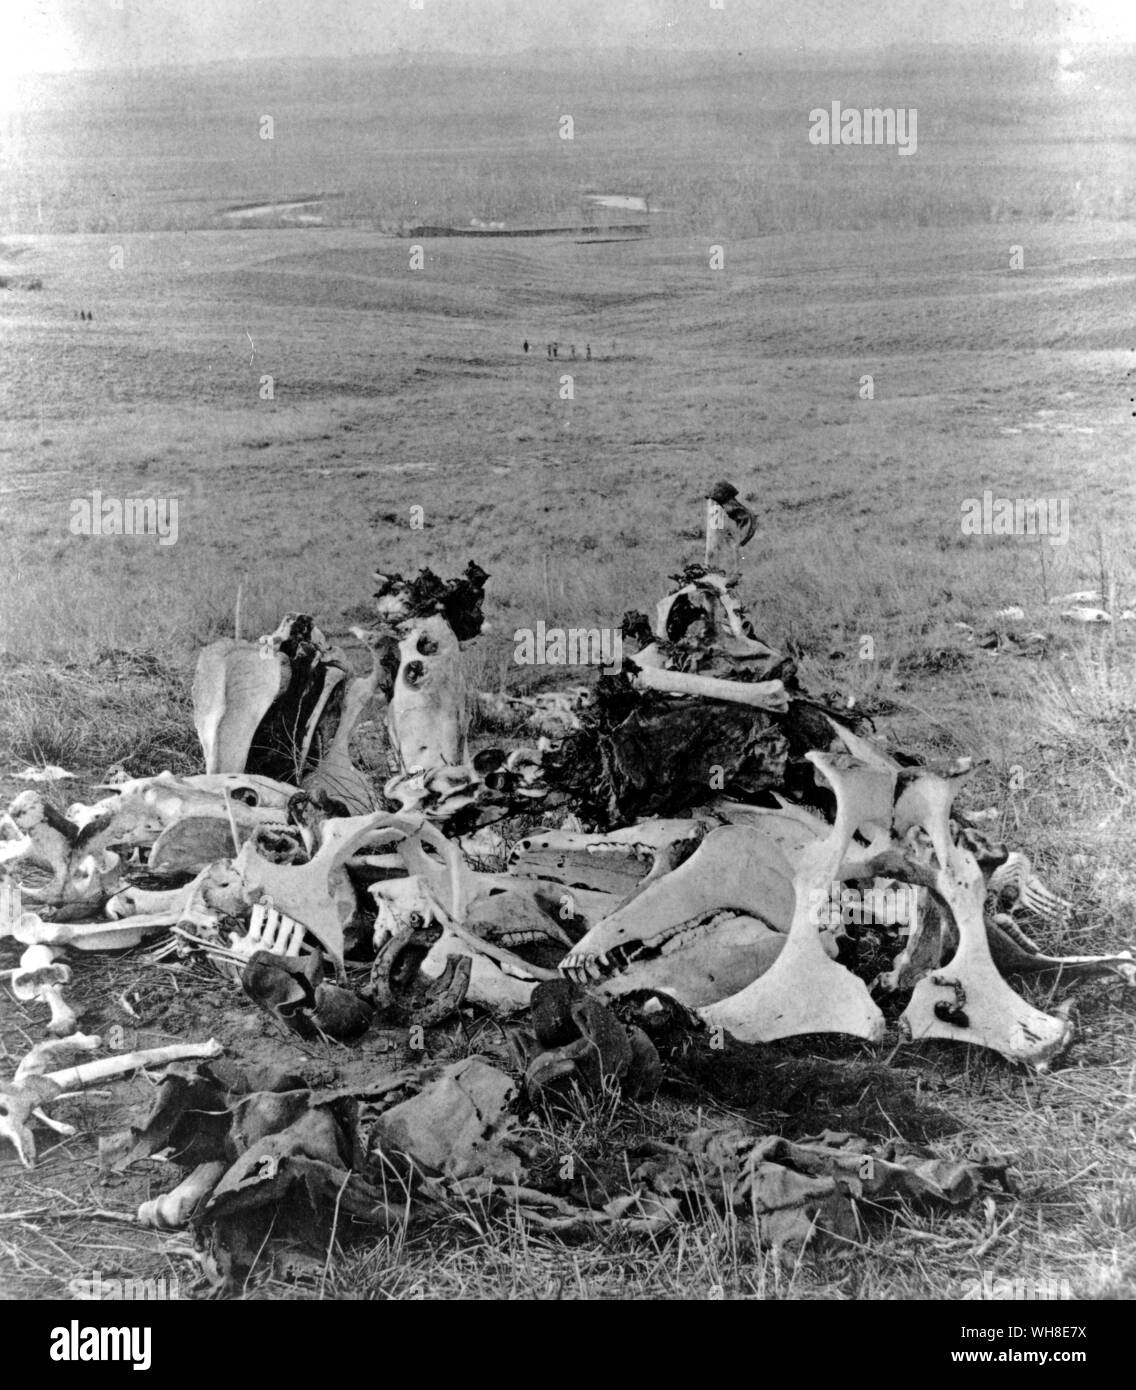 The remains of the Seventh Cavalry. Custers last stand. Thirty-eight men of the Seventh Cavalry died during the Battle of Little Bighorn in 1876. Stock Photo